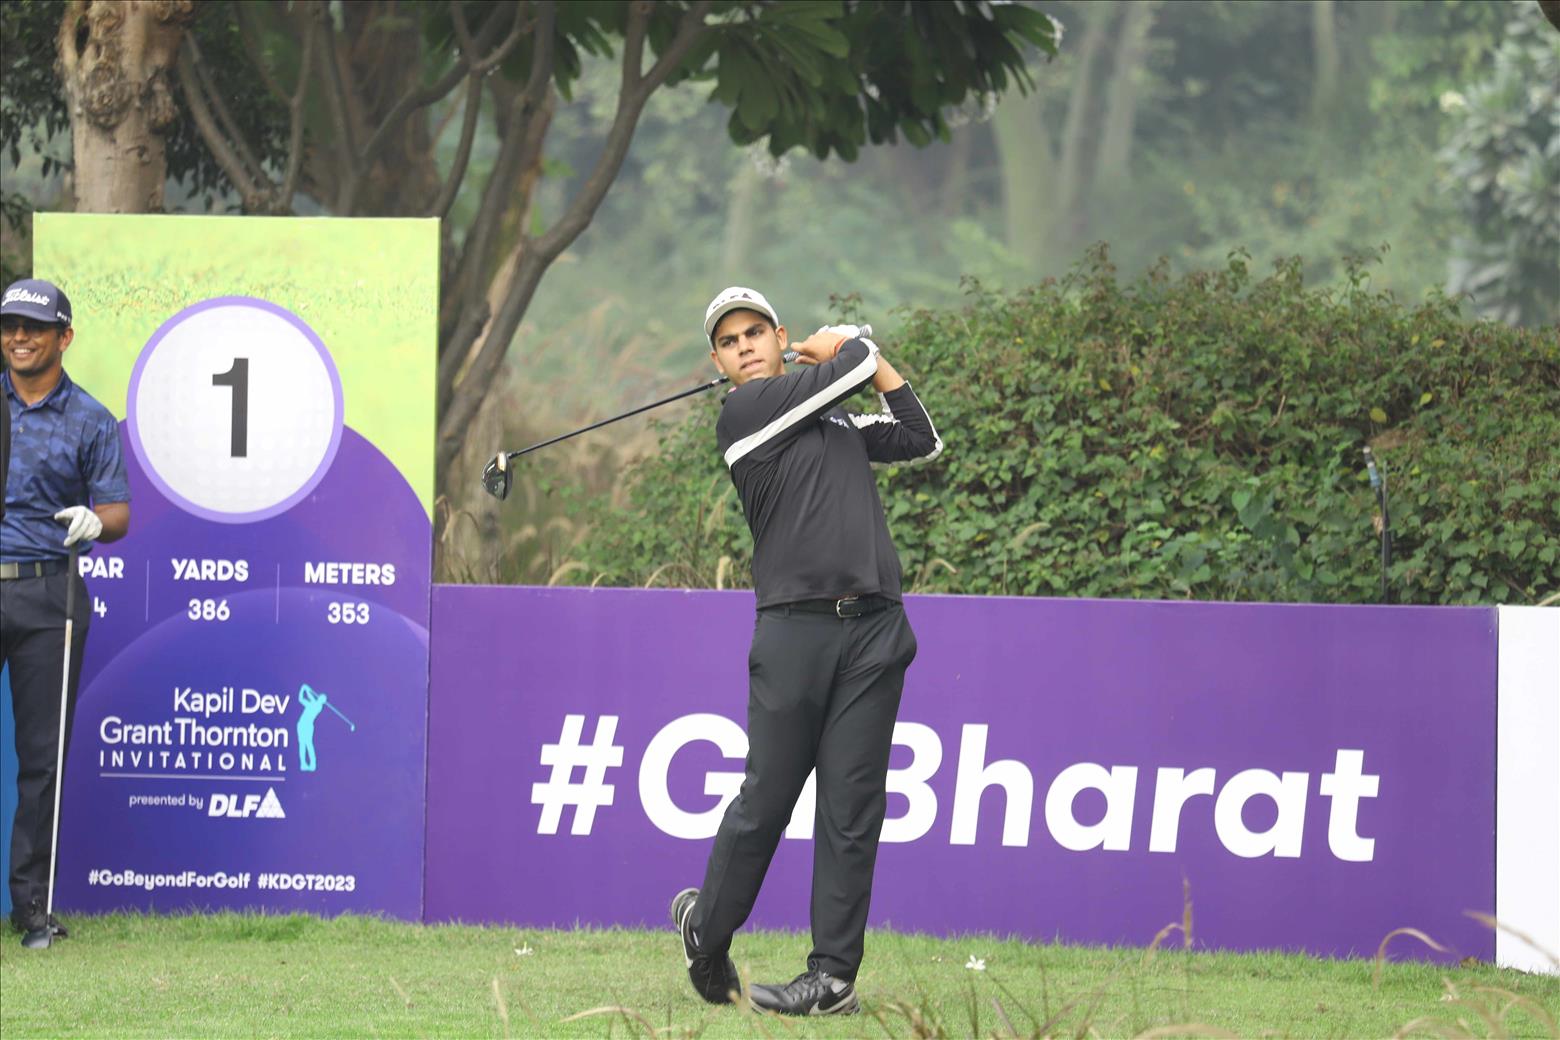 Kapil Dev Grant Thornton Invitational: Local Lad Sunhit Bishnoi Holds Clubhouse Lead On Day 2